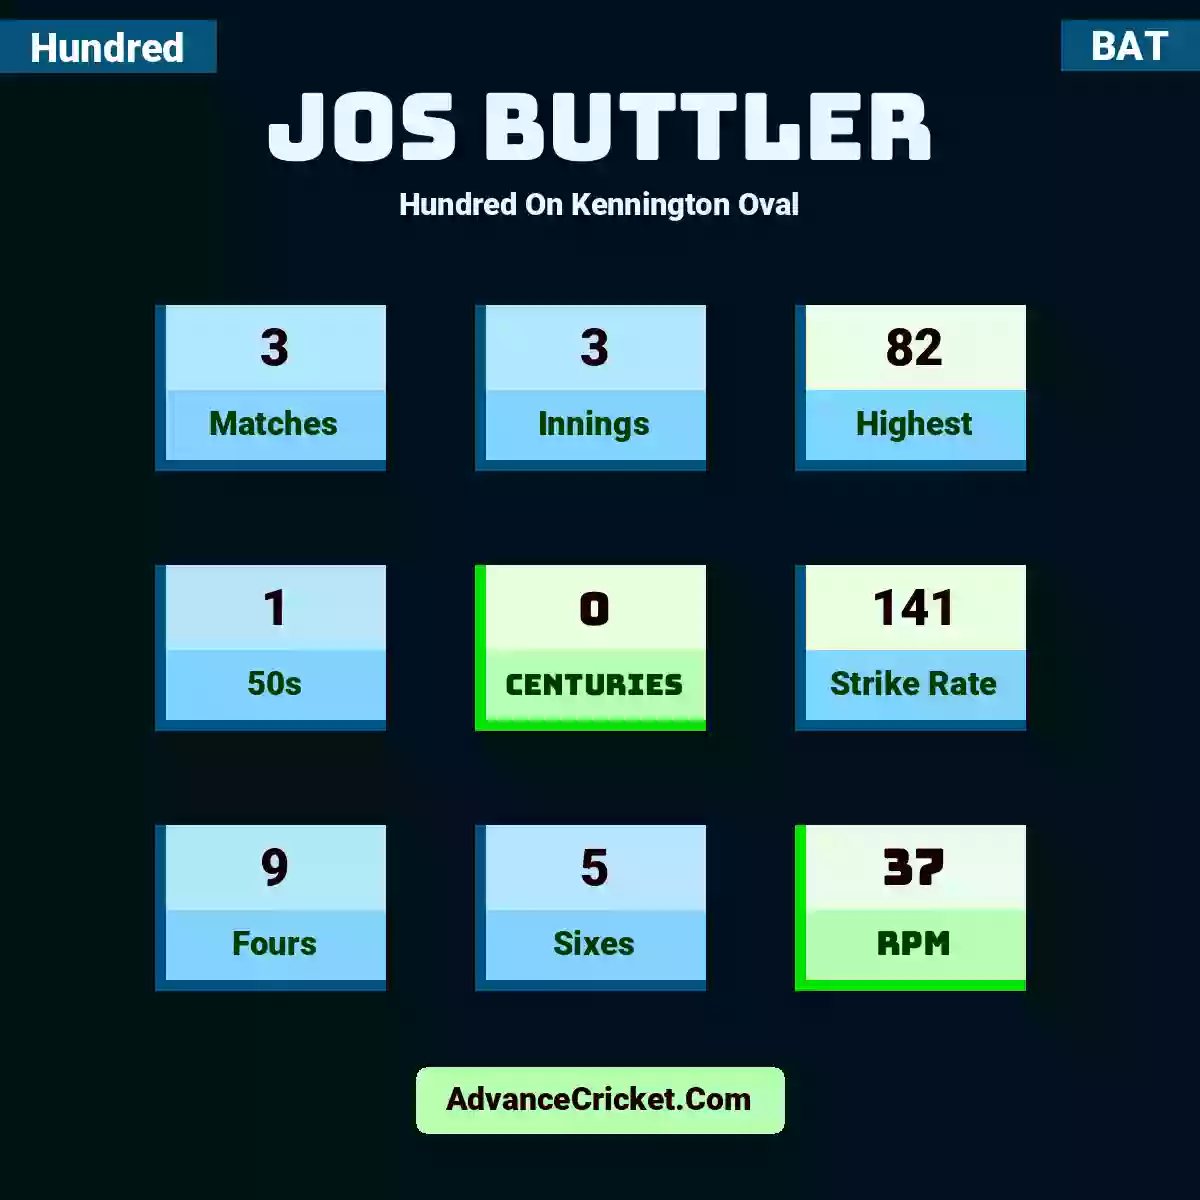 Jos Buttler Hundred  On Kennington Oval, Jos Buttler played 3 matches, scored 82 runs as highest, 1 half-centuries, and 0 centuries, with a strike rate of 141. J.Buttler hit 9 fours and 5 sixes, with an RPM of 37.